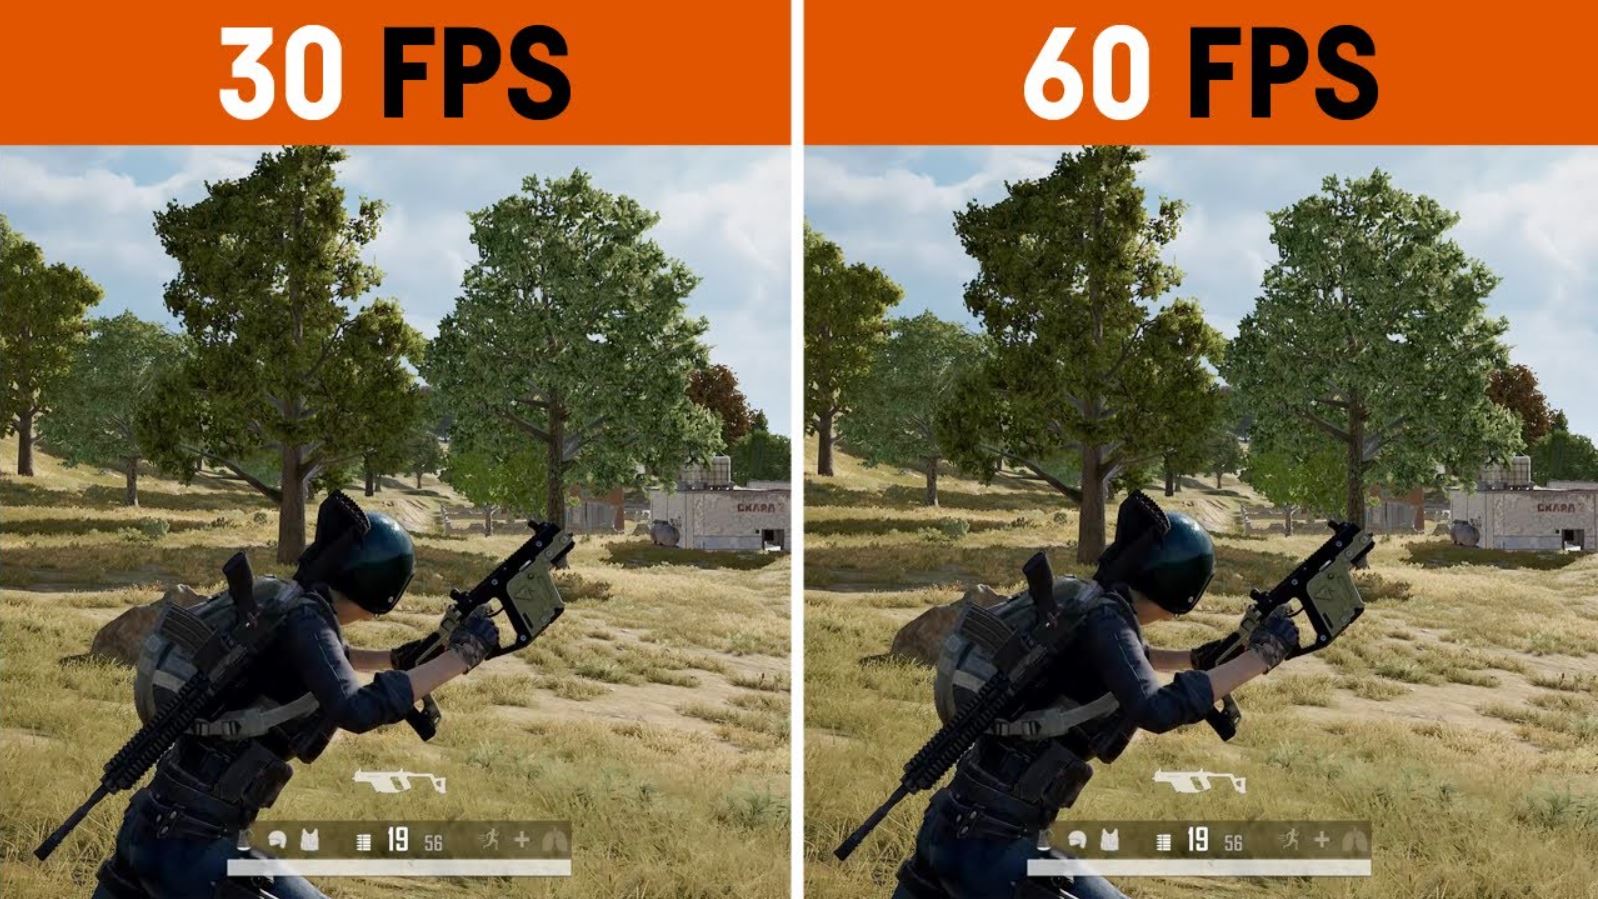 Fps support. 60 ФПС. ФПС картинка. 30 ФПС vs 60 ФПС. Картинка 120 ФПС.